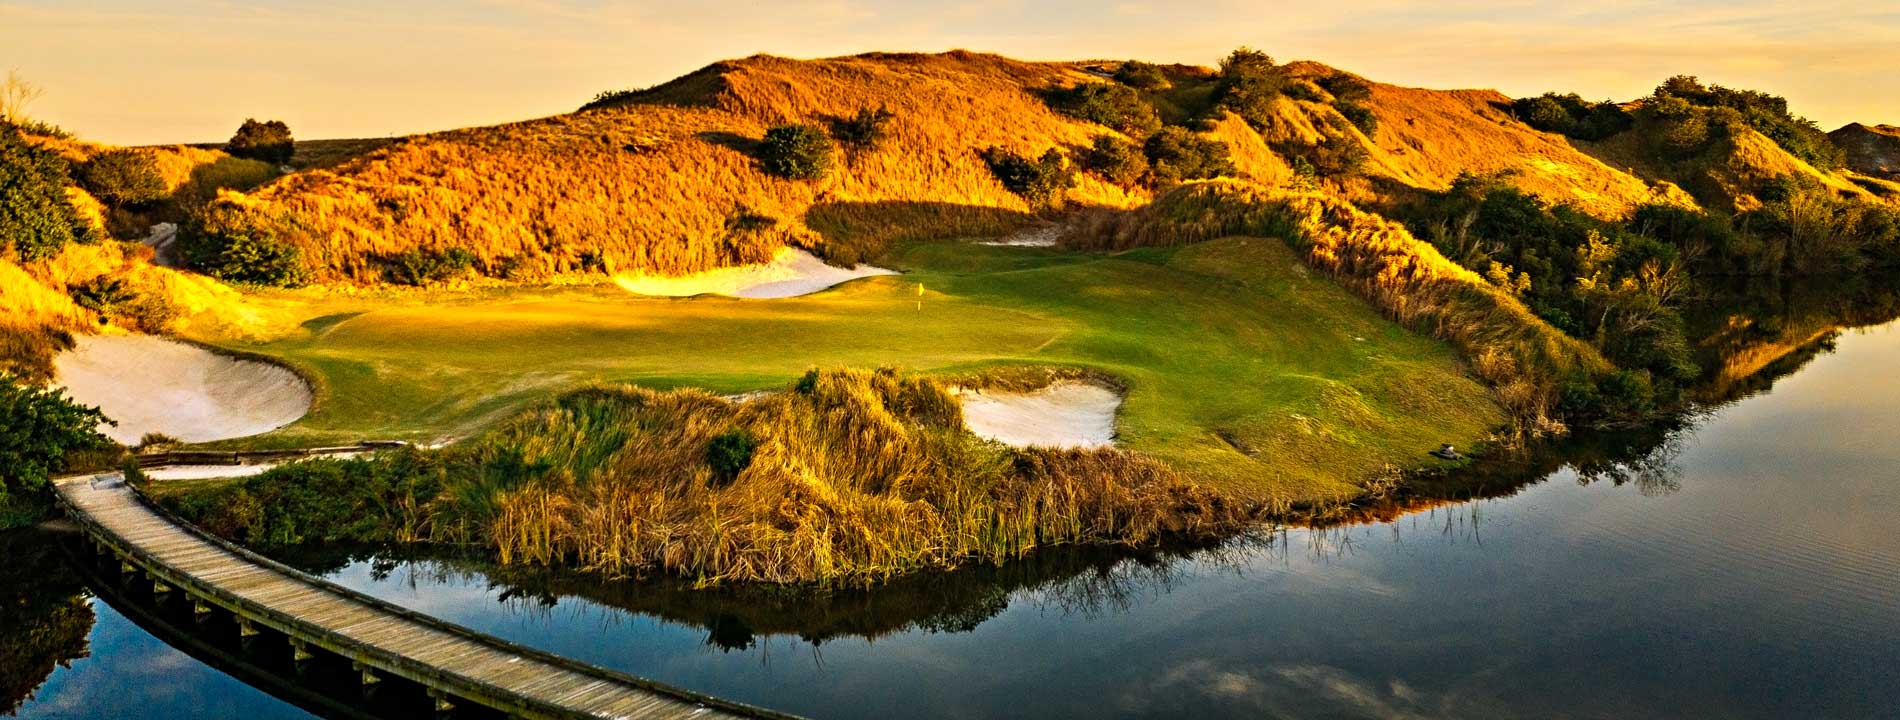 Streamsong Resort boasts three courses designed by several of the world's top architects.